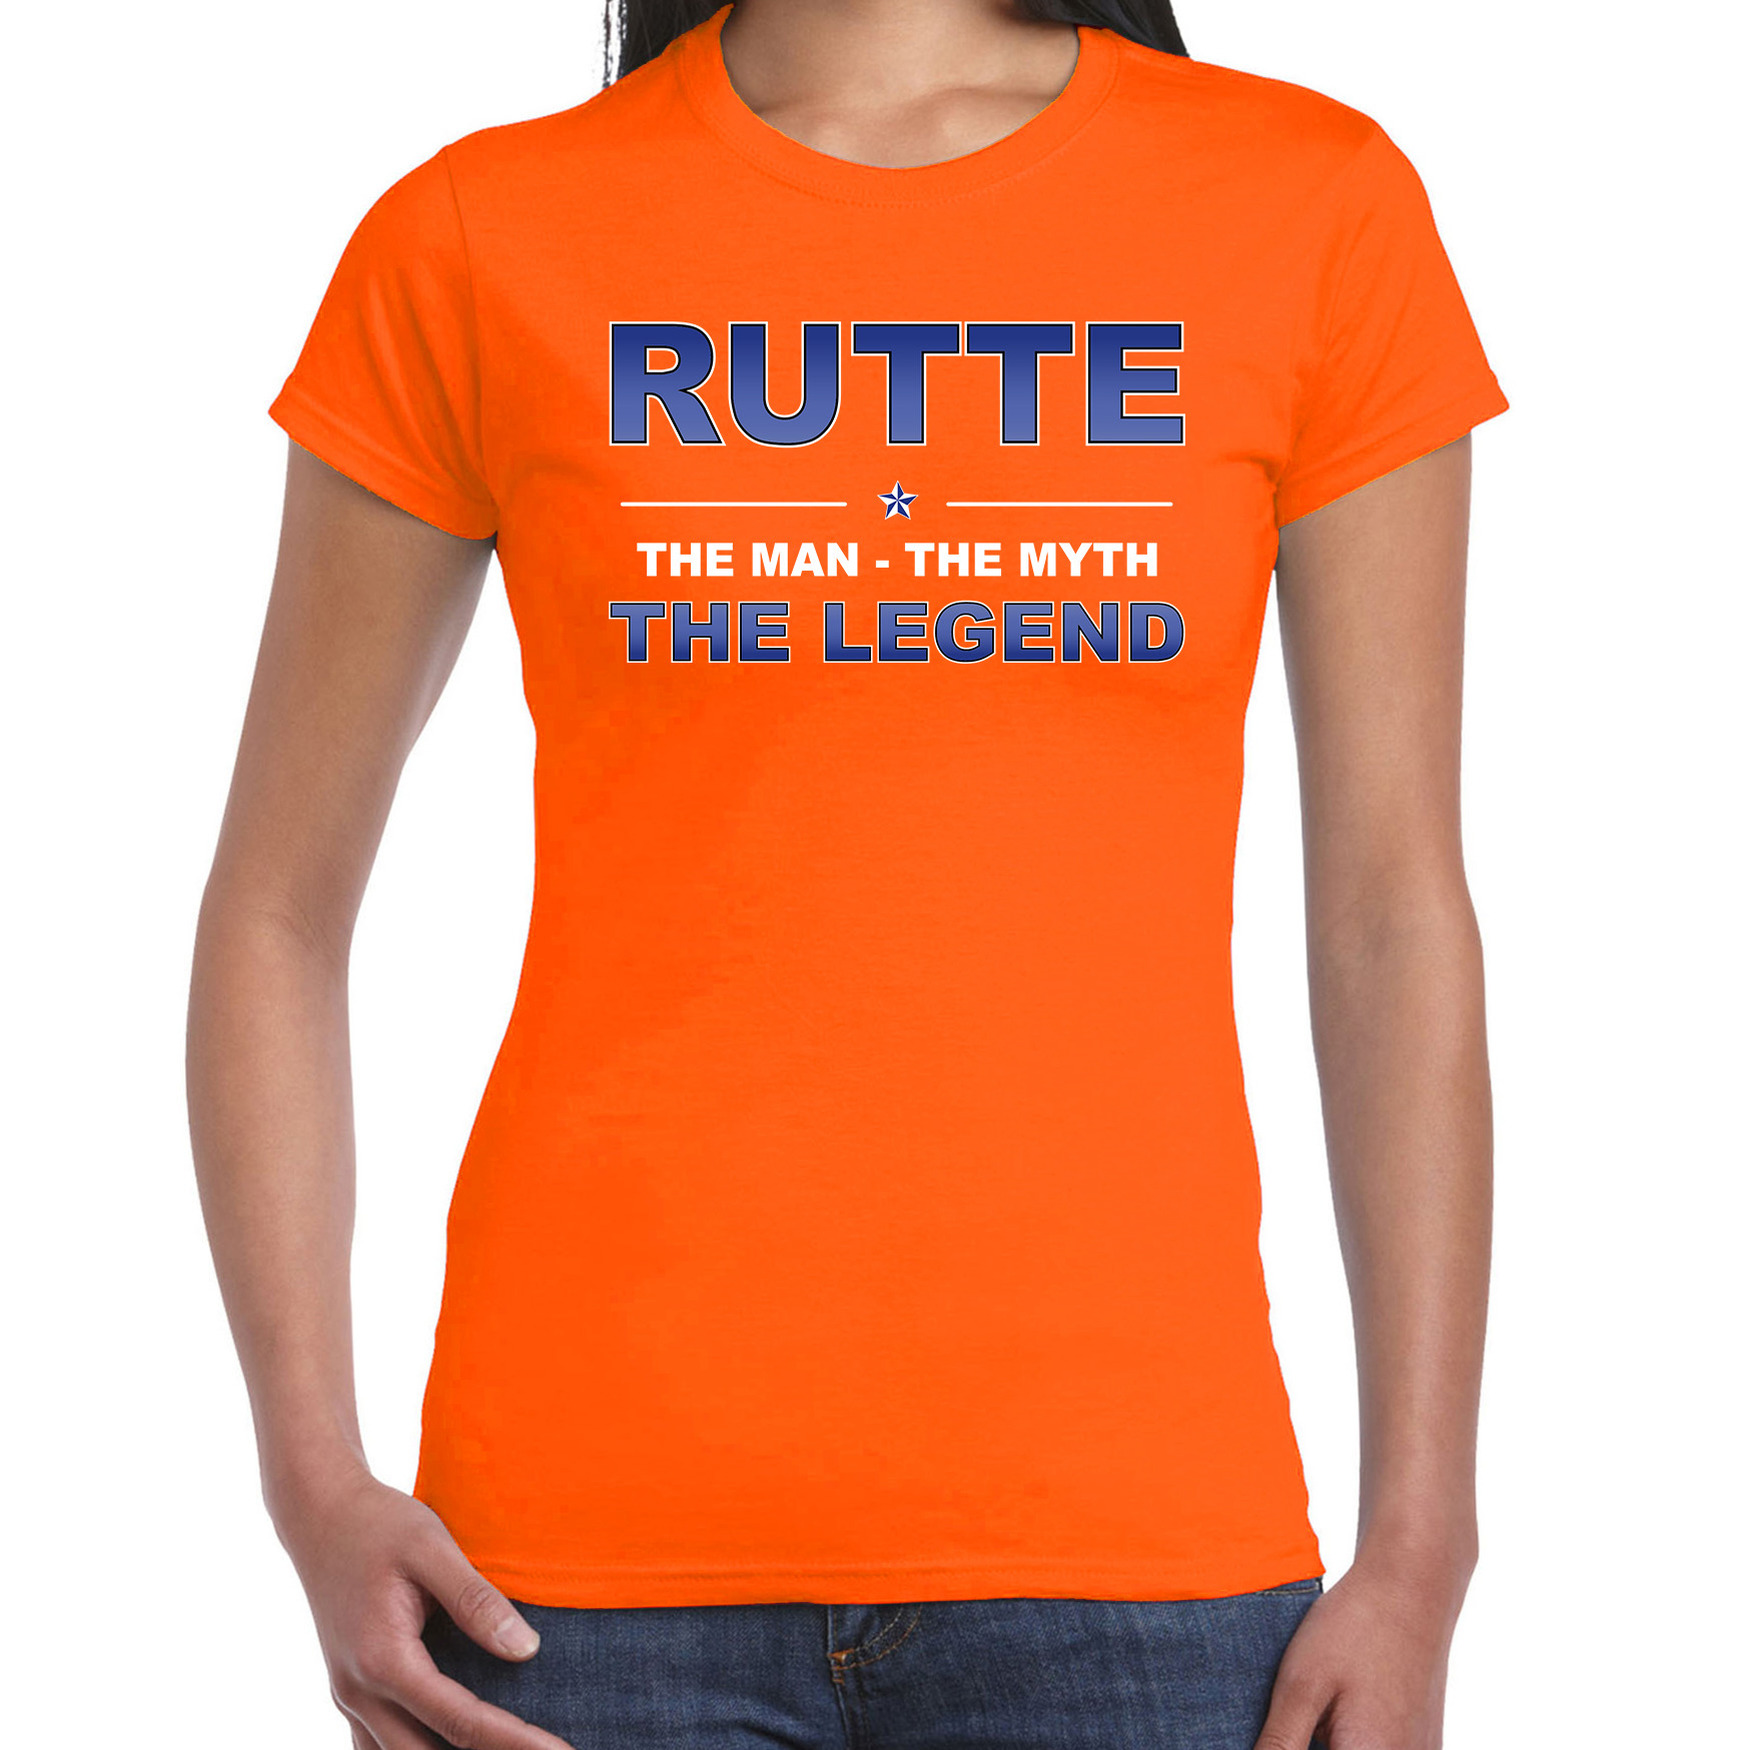 Rutte naam t-shirt the man-the myth-the legend oranje voor dames